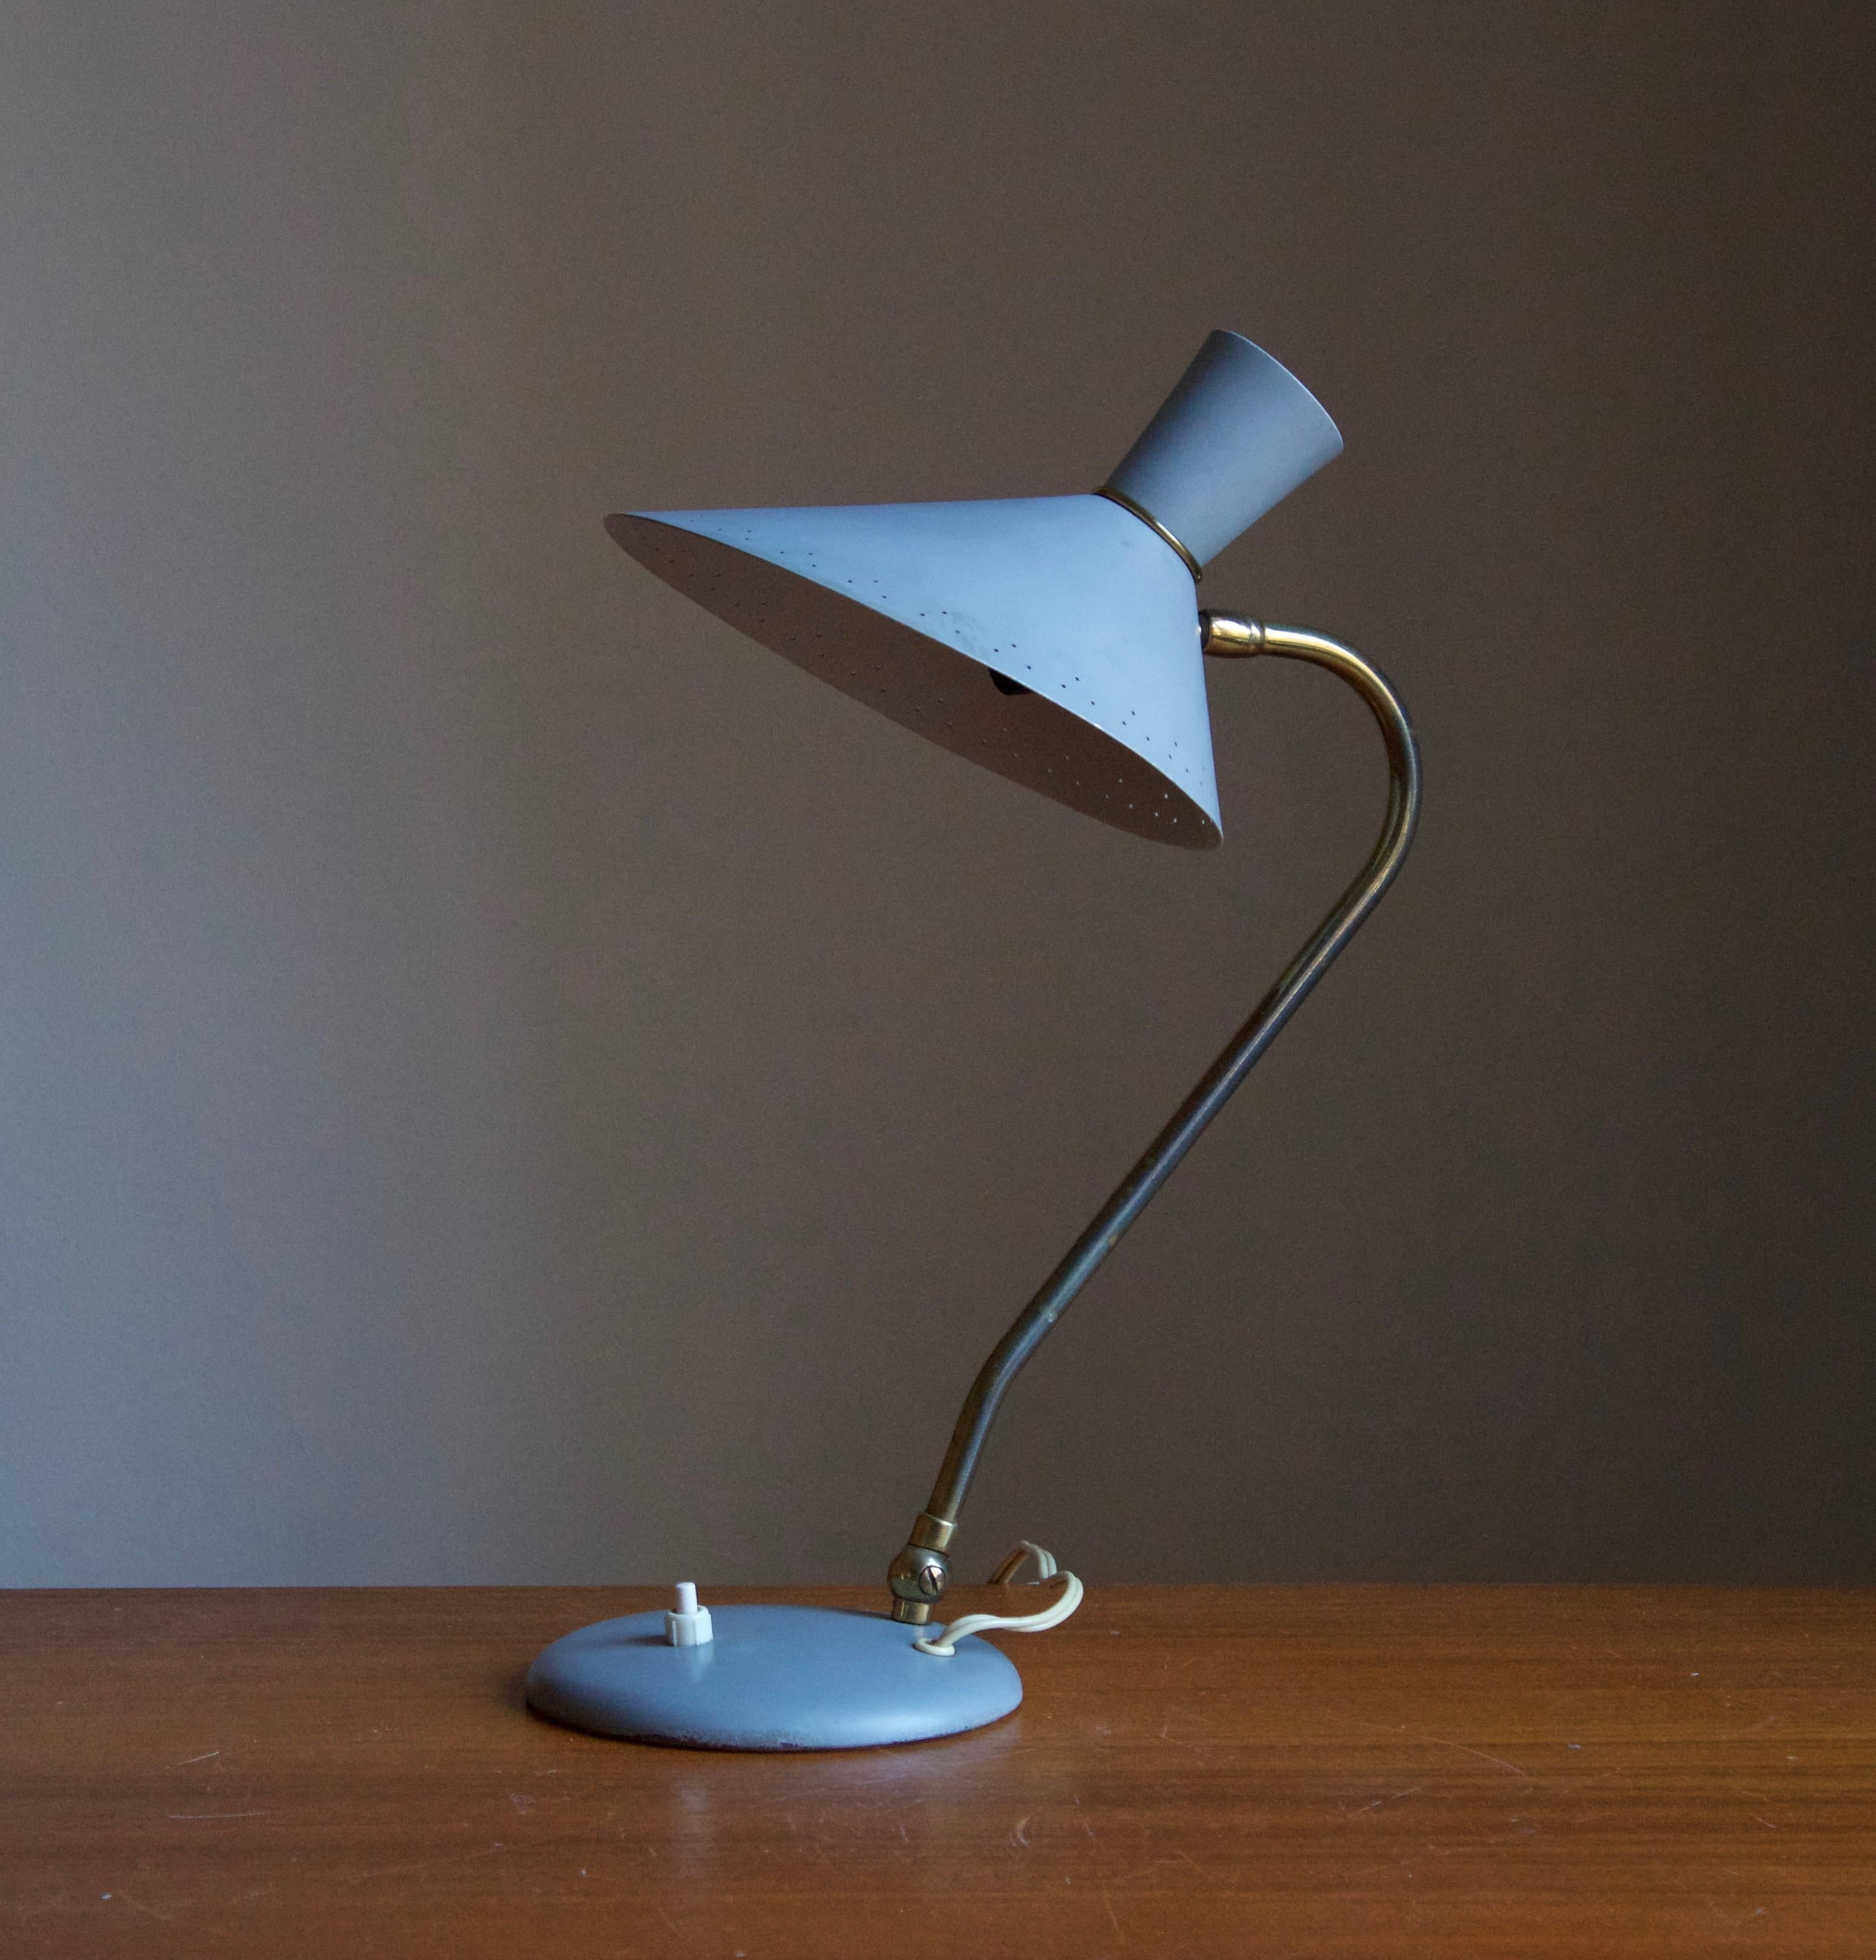 A table lamp / desk light, by Svend Aage Holm Sørensen, Denmark, 1950s. Adjustable screen, original blue lacquer. 

Other designers of the period include Paavo Tynell, Serge Mouille, Josef Frank, Angelo Lelii, and Lisa Johansson-Pape.